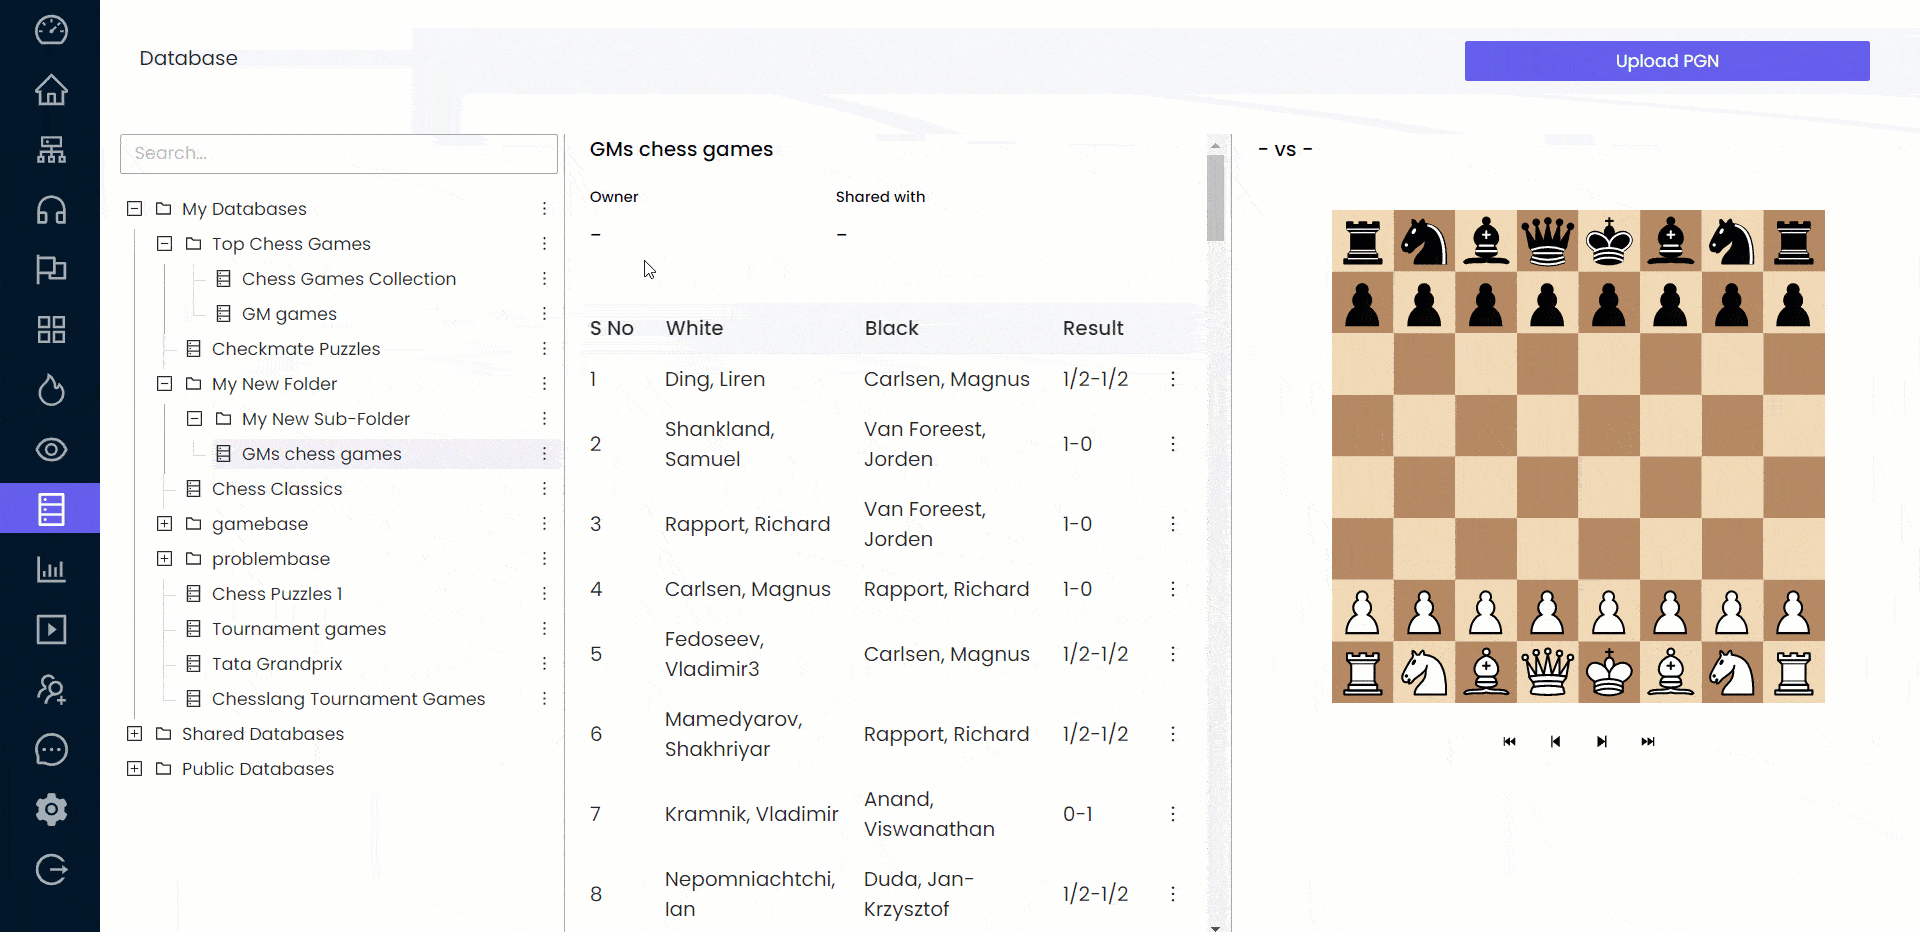 sql - Databases for chess games - Stack Overflow